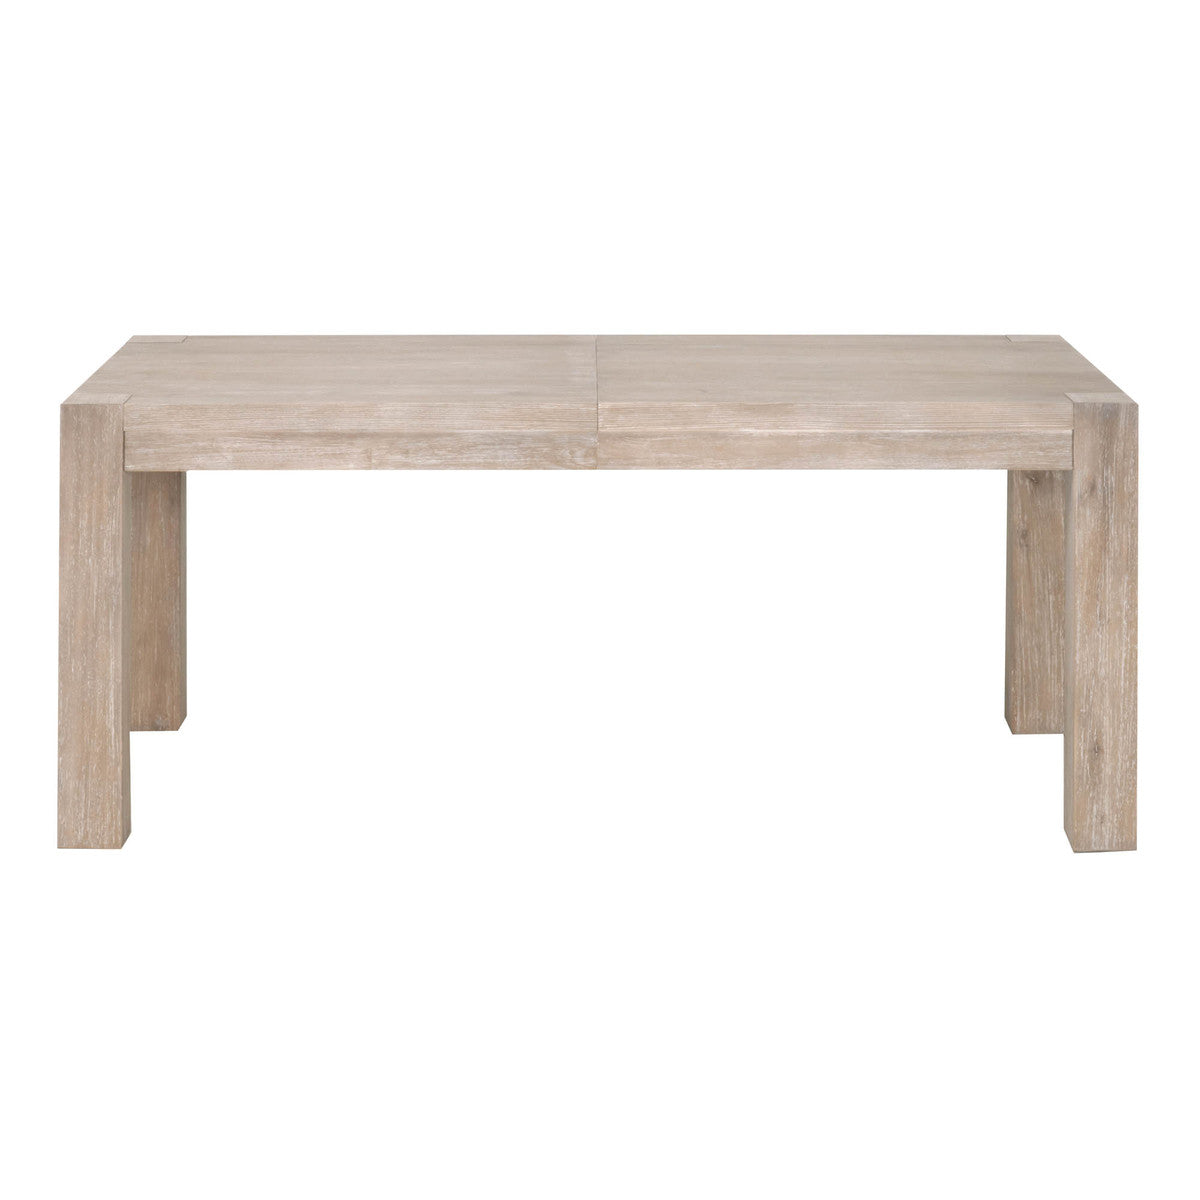 ADLER EXTENSION DINING TABLE- GRAY ACACIA